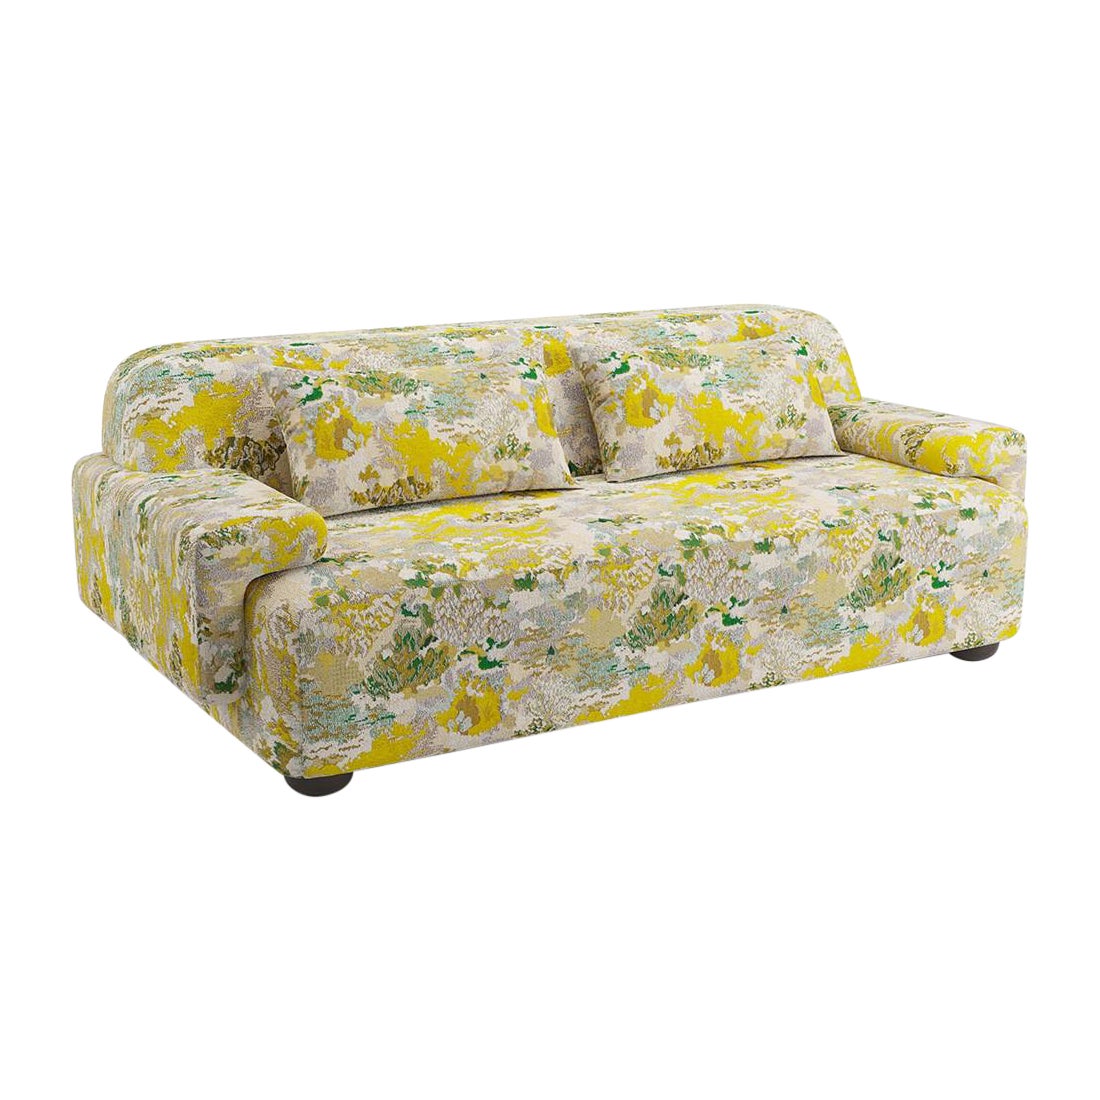 Popus Editions Lena 2.5 Seater Sofa in Citrine Marrakech Jacquard Upholstery For Sale